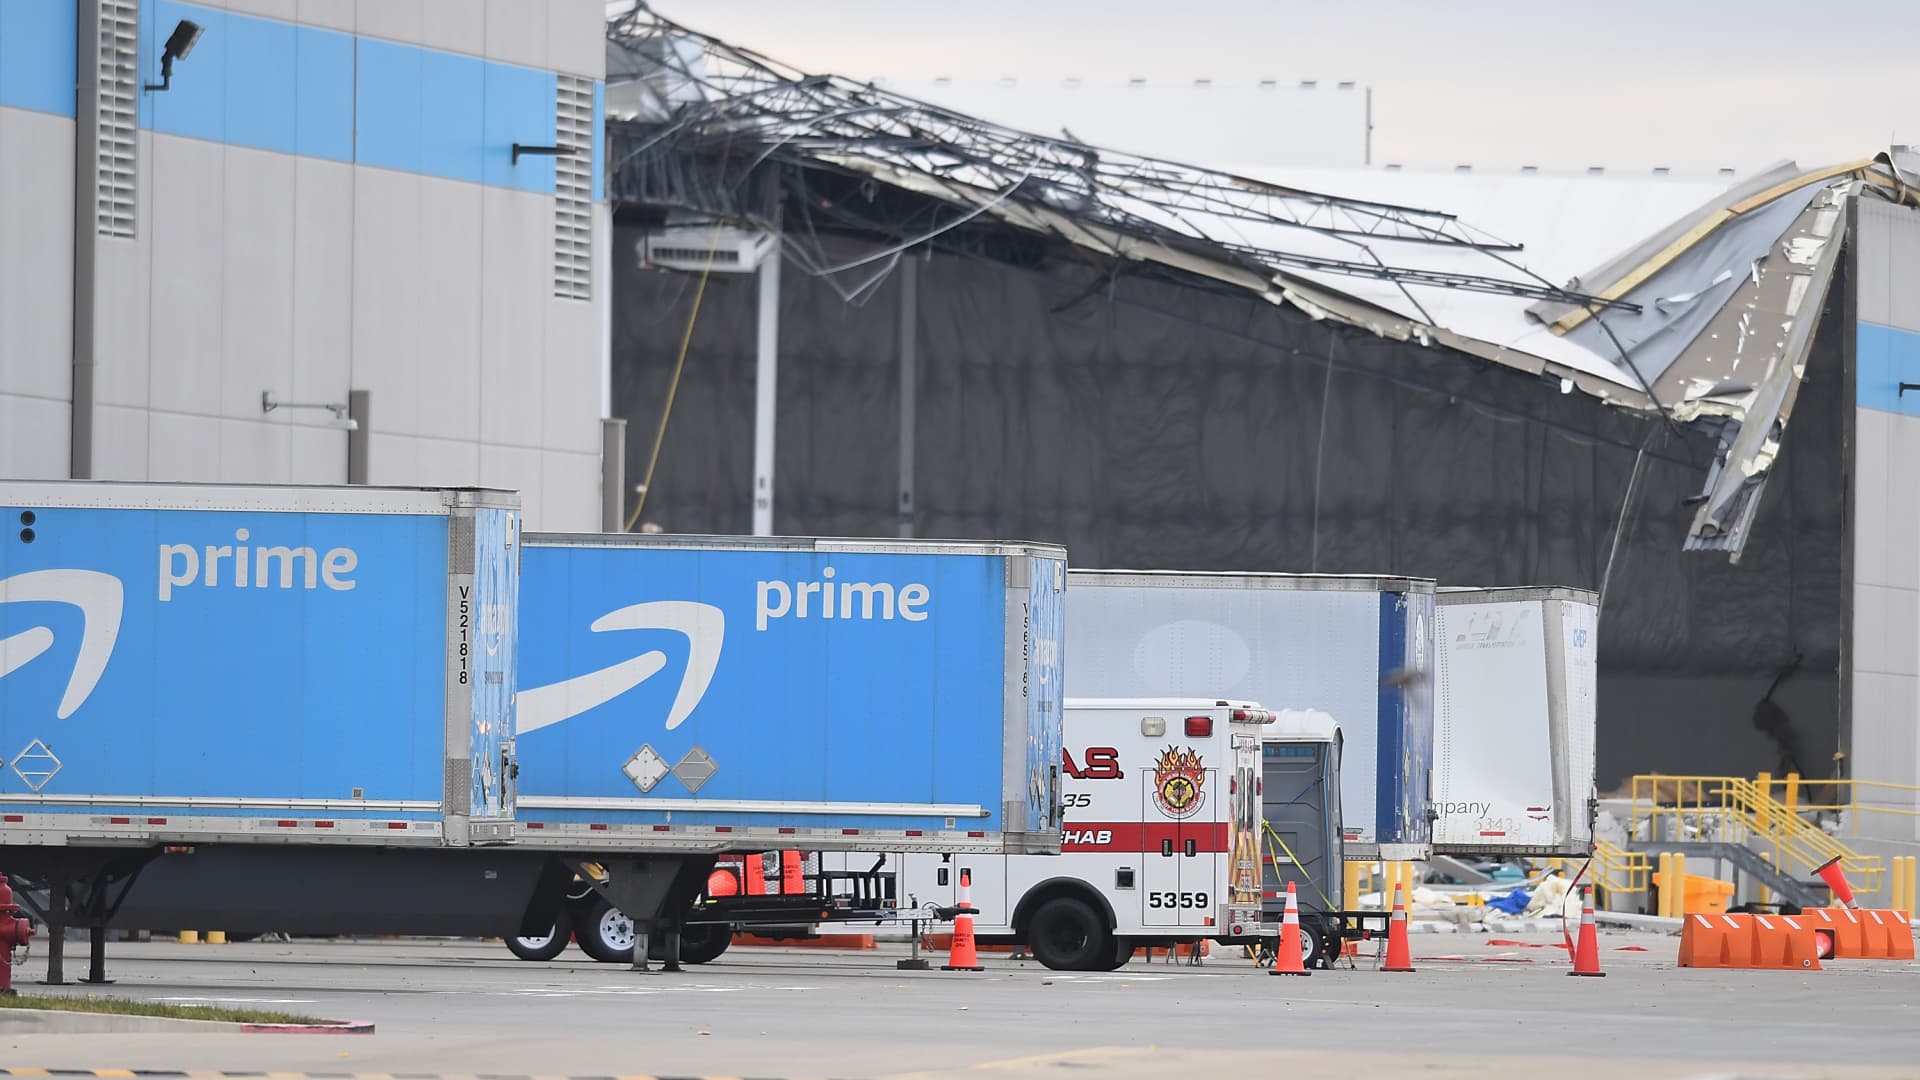 Amazon truck cabs are seen outside a damaged Amazon Distribution Center on December 11, 2021 in Edwardsville, Illinois. According to reports, the Distribution Center was struck by a tornado Friday night.